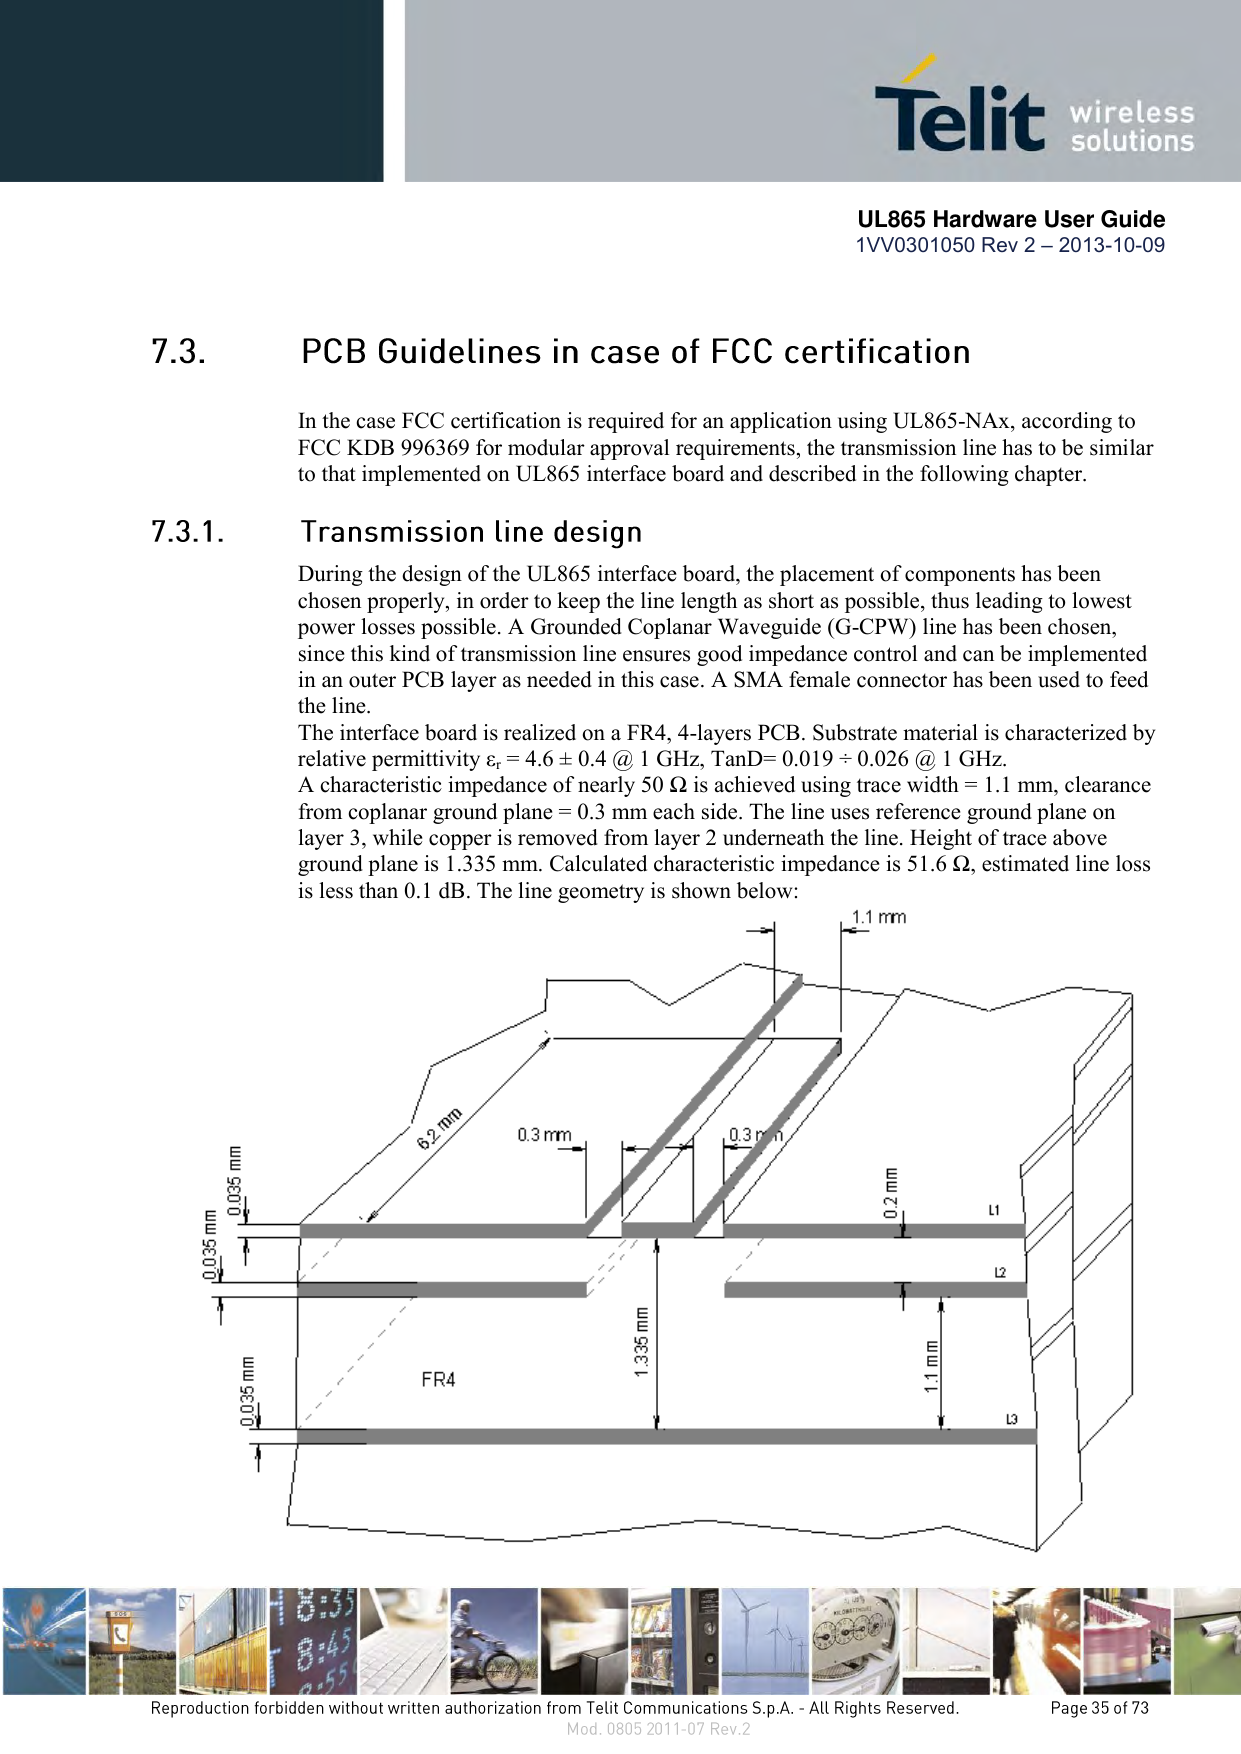       UL865 Hardware User Guide 1VV0301050 Rev 2 – 2013-10-09    In the case FCC certification is required for an application using UL865-NAx, according to FCC KDB 996369 for modular approval requirements, the transmission line has to be similar to that implemented on UL865 interface board and described in the following chapter.  During the design of the UL865 interface board, the placement of components has been chosen properly, in order to keep the line length as short as possible, thus leading to lowest power losses possible. A Grounded Coplanar Waveguide (G-CPW) line has been chosen, since this kind of transmission line ensures good impedance control and can be implemented in an outer PCB layer as needed in this case. A SMA female connector has been used to feed the line. The interface board is realized on a FR4, 4-layers PCB. Substrate material is characterized by relative permittivity εr = 4.6 ± 0.4 @ 1 GHz, TanD= 0.019 ÷ 0.026 @ 1 GHz. A characteristic impedance of nearly 50 Ω is achieved using trace width = 1.1 mm, clearance from coplanar ground plane = 0.3 mm each side. The line uses reference ground plane on layer 3, while copper is removed from layer 2 underneath the line. Height of trace above ground plane is 1.335 mm. Calculated characteristic impedance is 51.6 Ω, estimated line loss is less than 0.1 dB. The line geometry is shown below:  